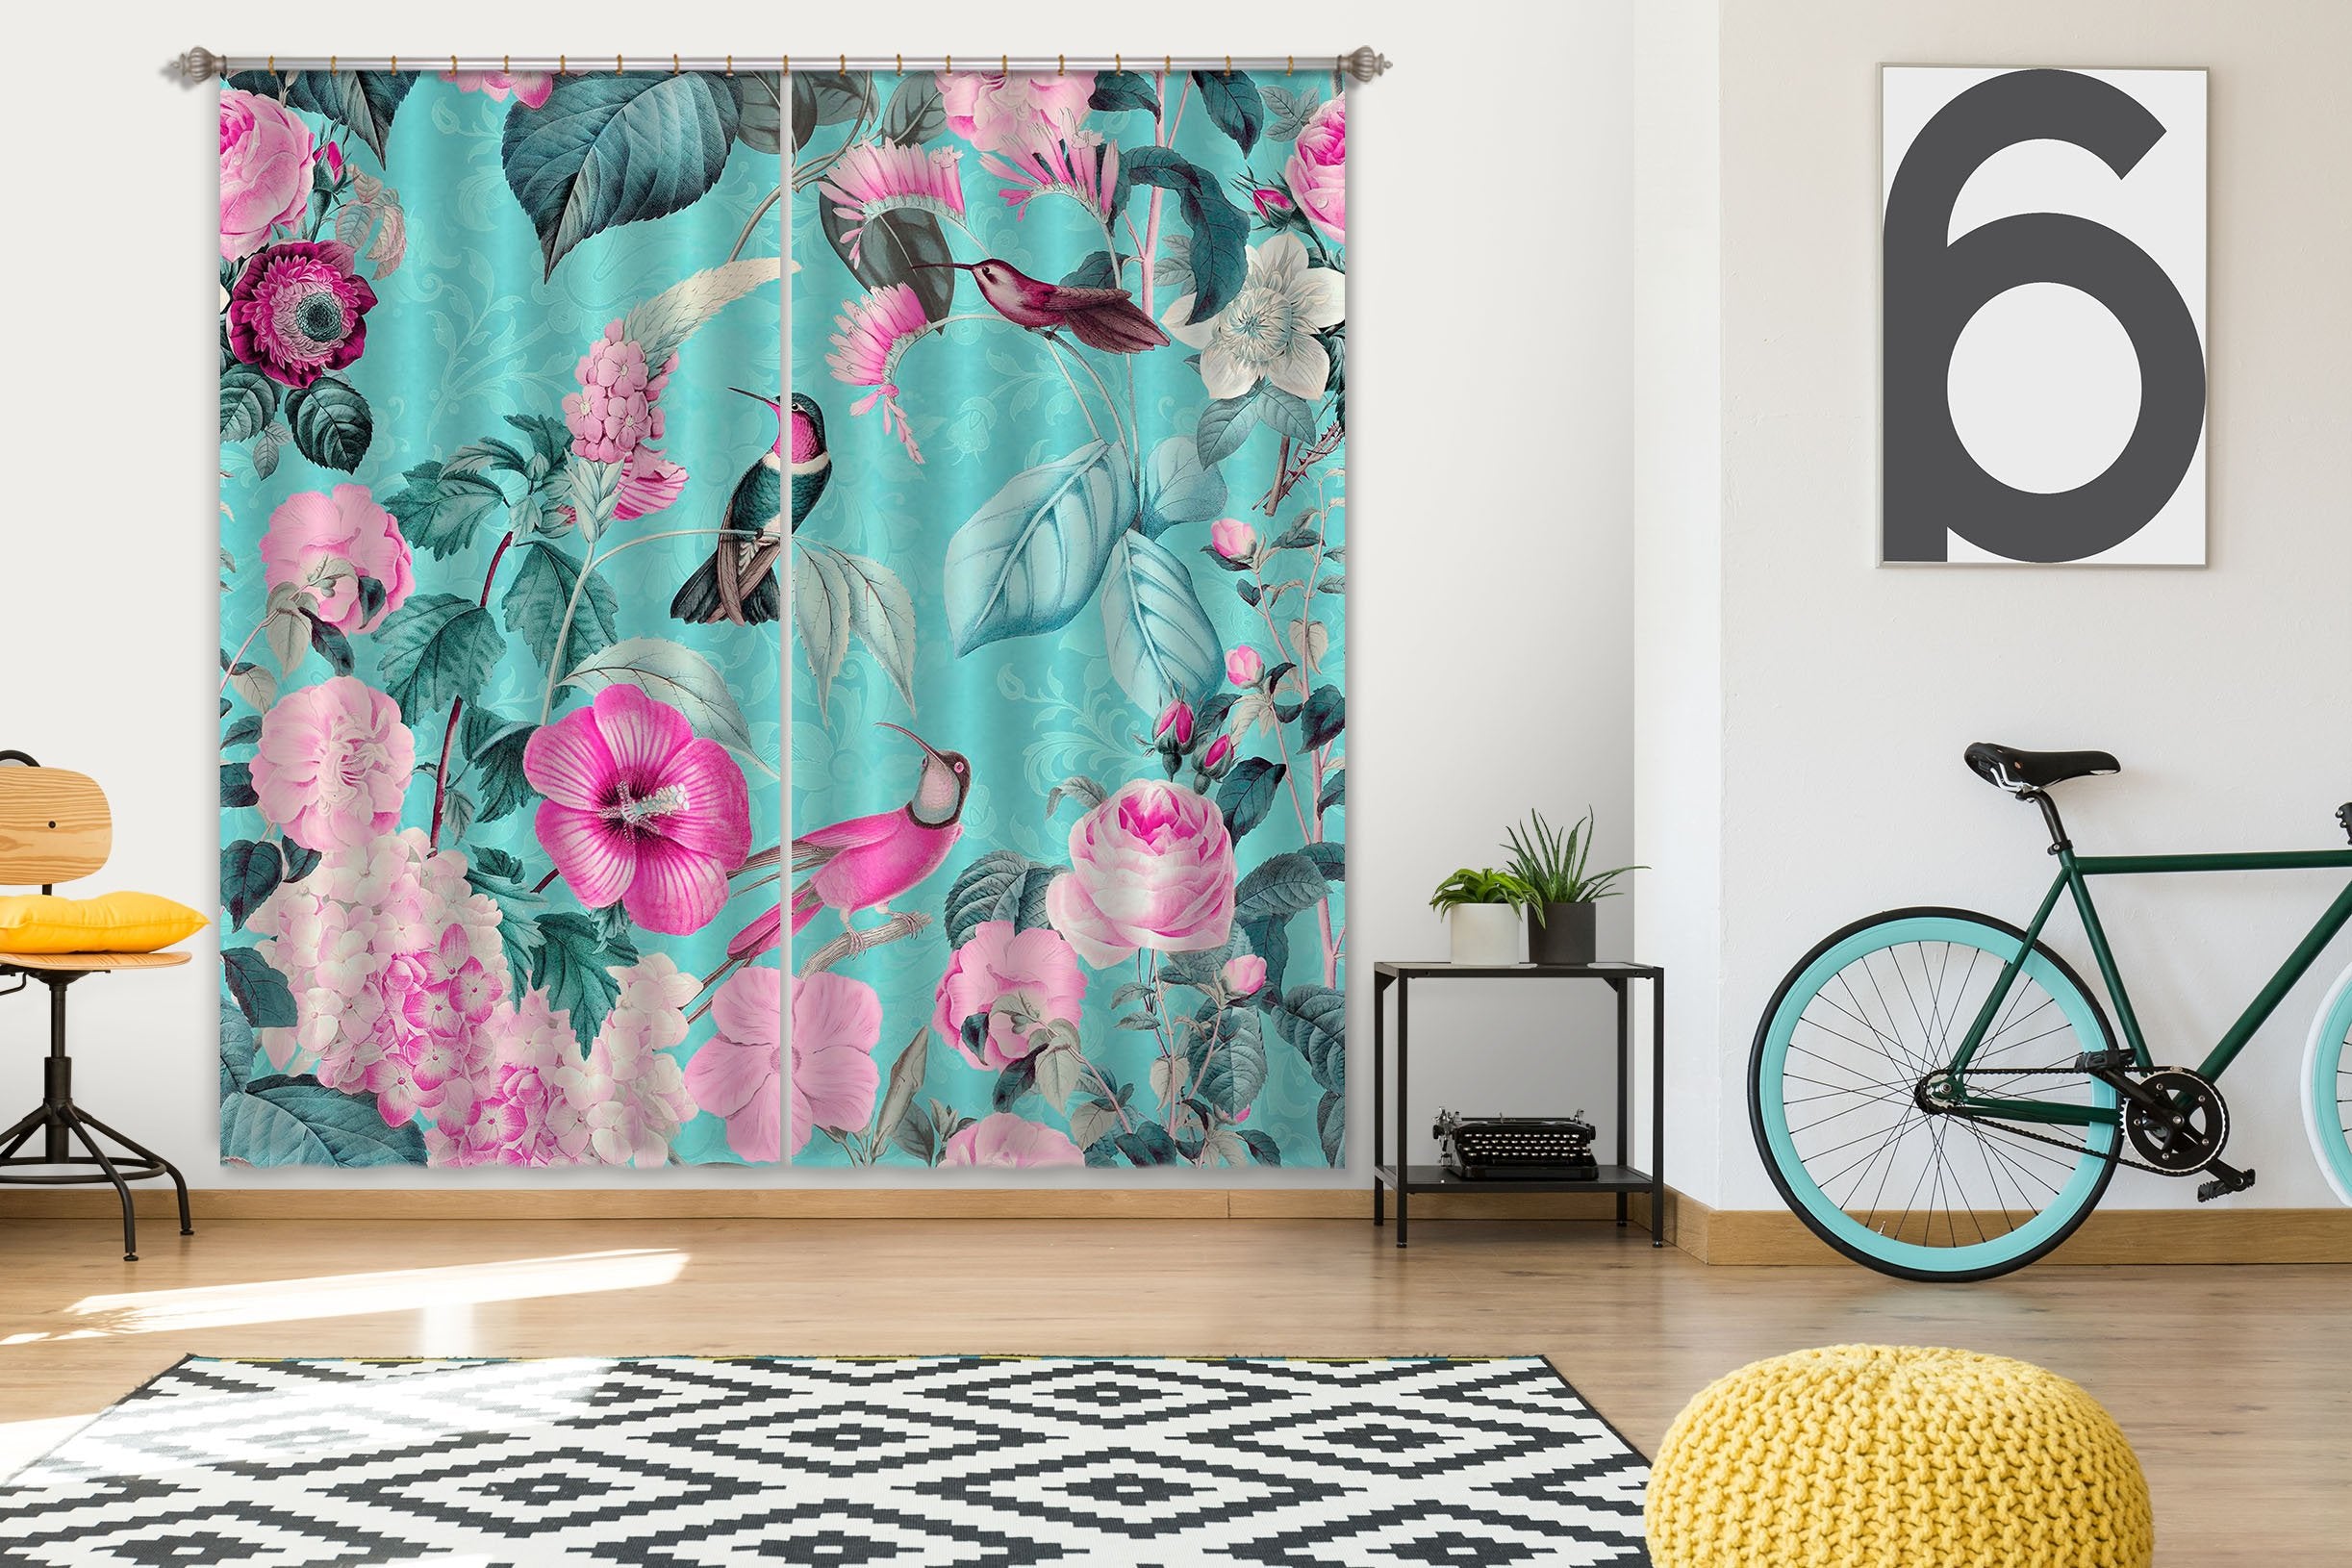 3D Bird And Flower Forest 063 Andrea haase Curtain Curtains Drapes Wallpaper AJ Wallpaper 